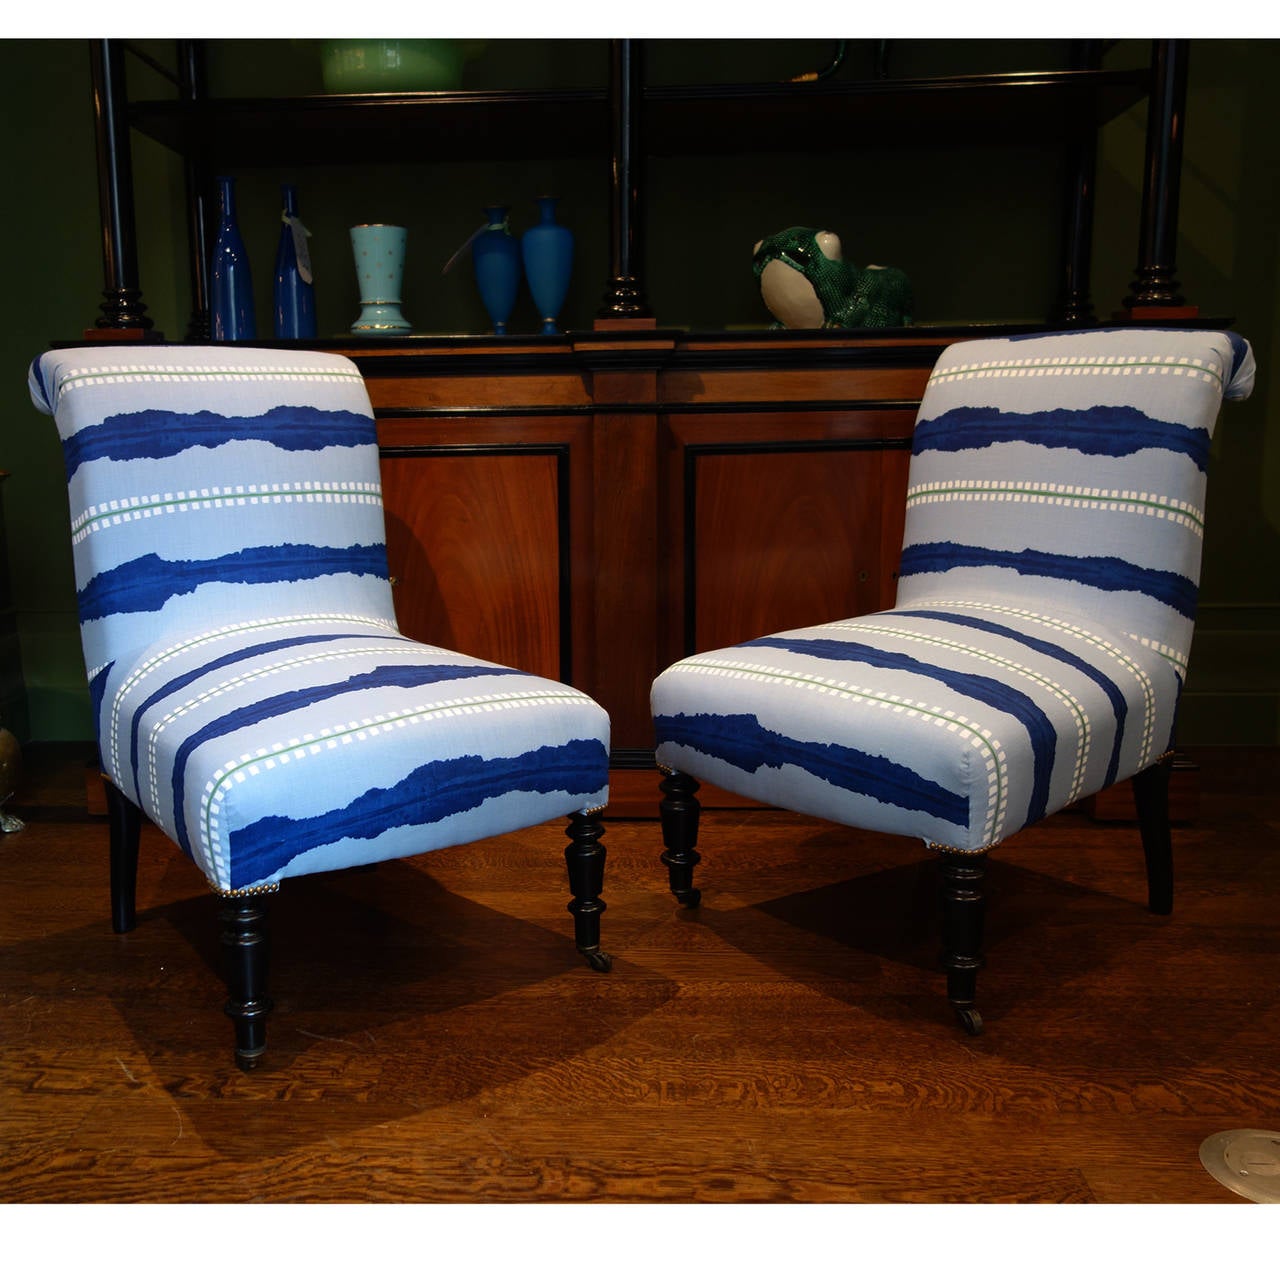 Pair of late 19th century slipper chairs newly upholstered in Konstantin Kakanias striped linen with nailhead detail at corners.